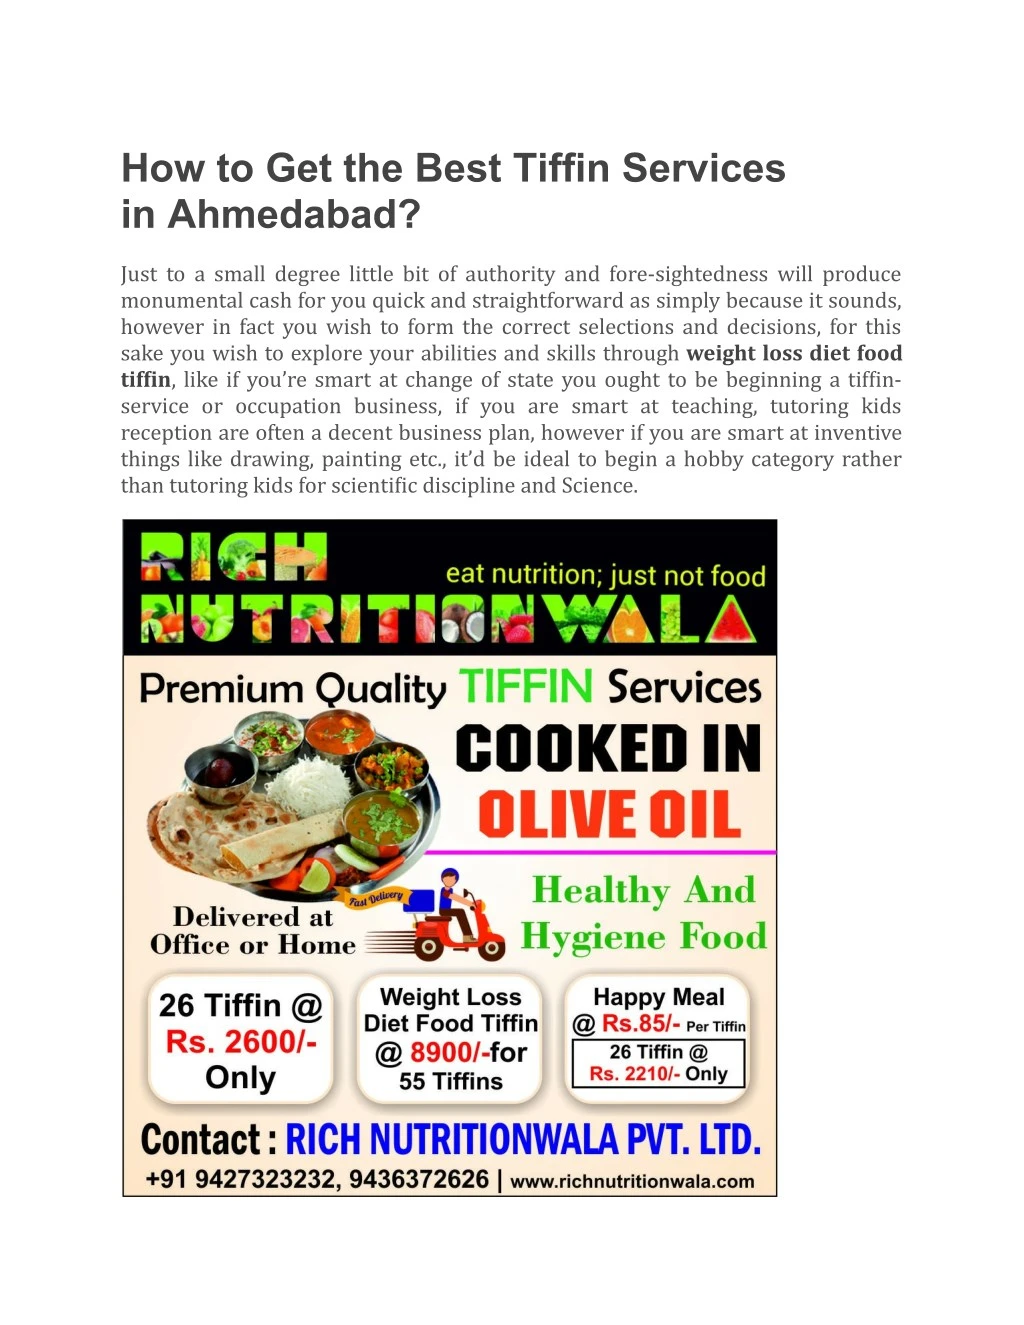 how to get the best tiffin services in ahmedabad